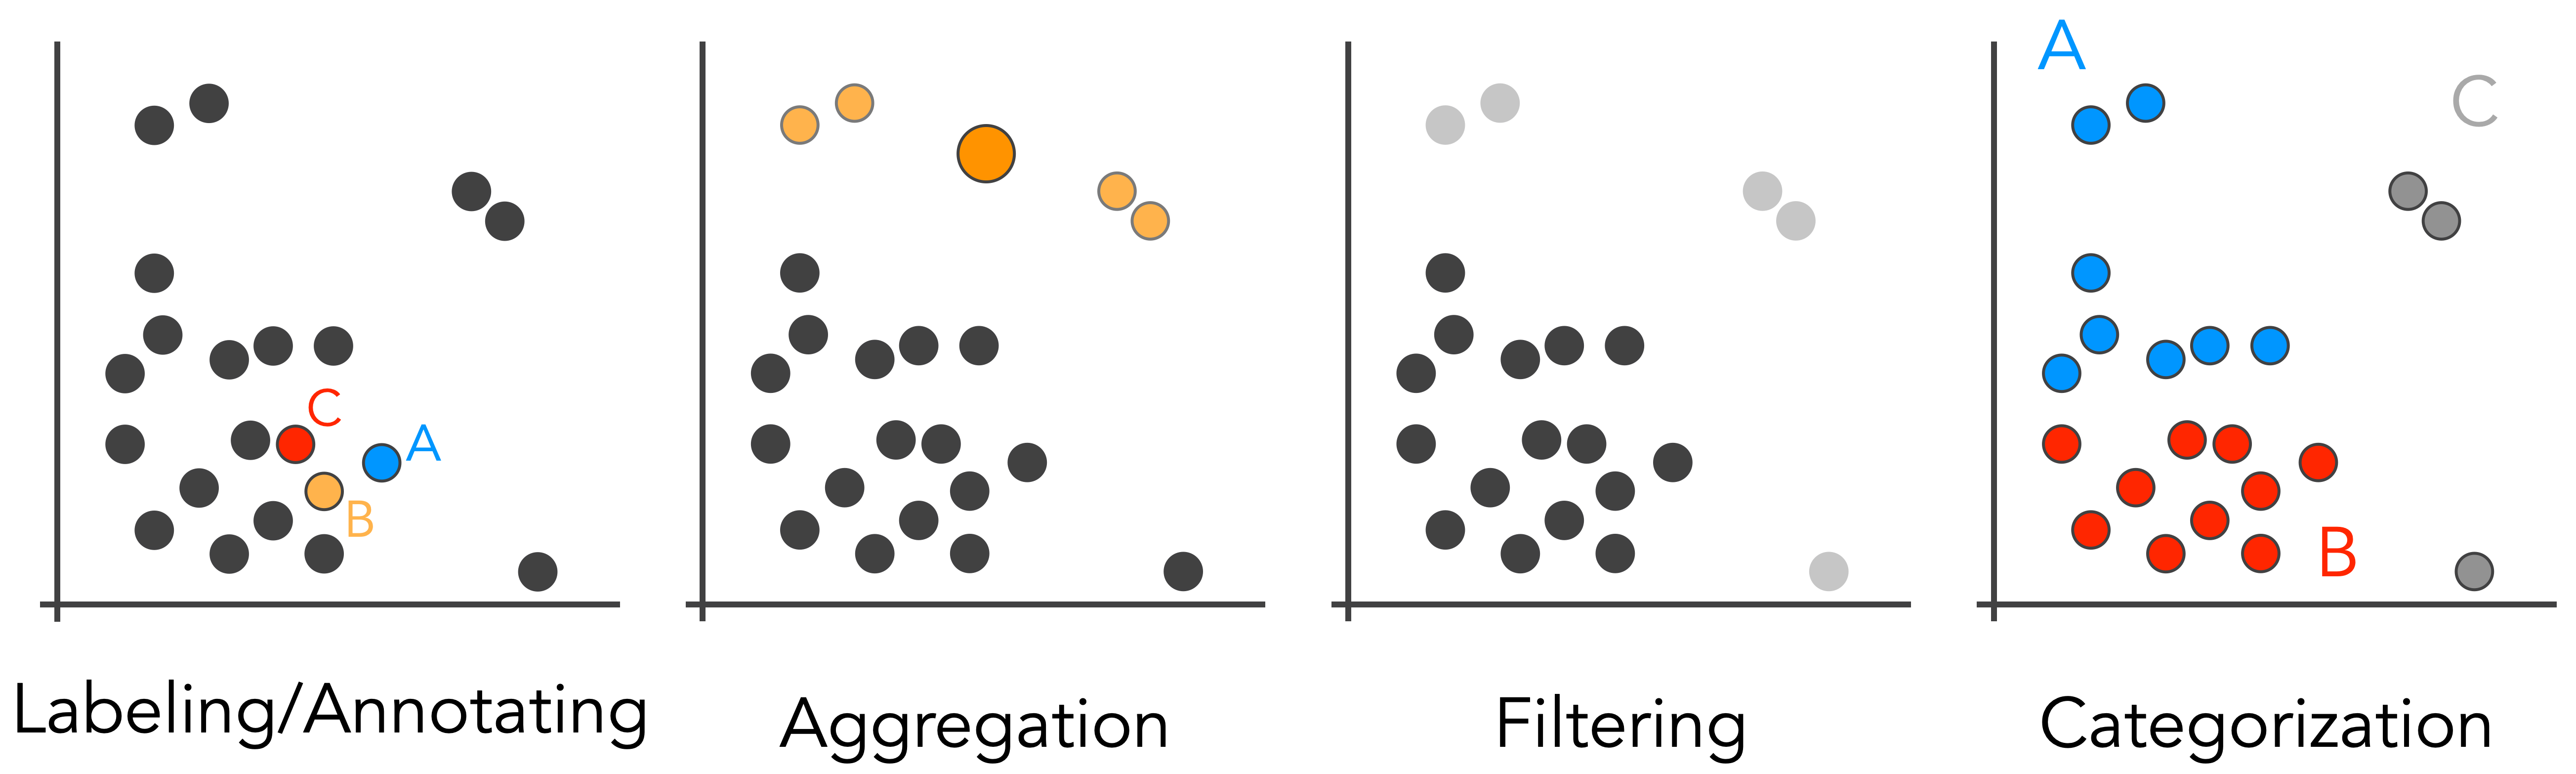 Four scatterplots arranged horizontally showing labeling, aggregation, filtering, and categorization operations.